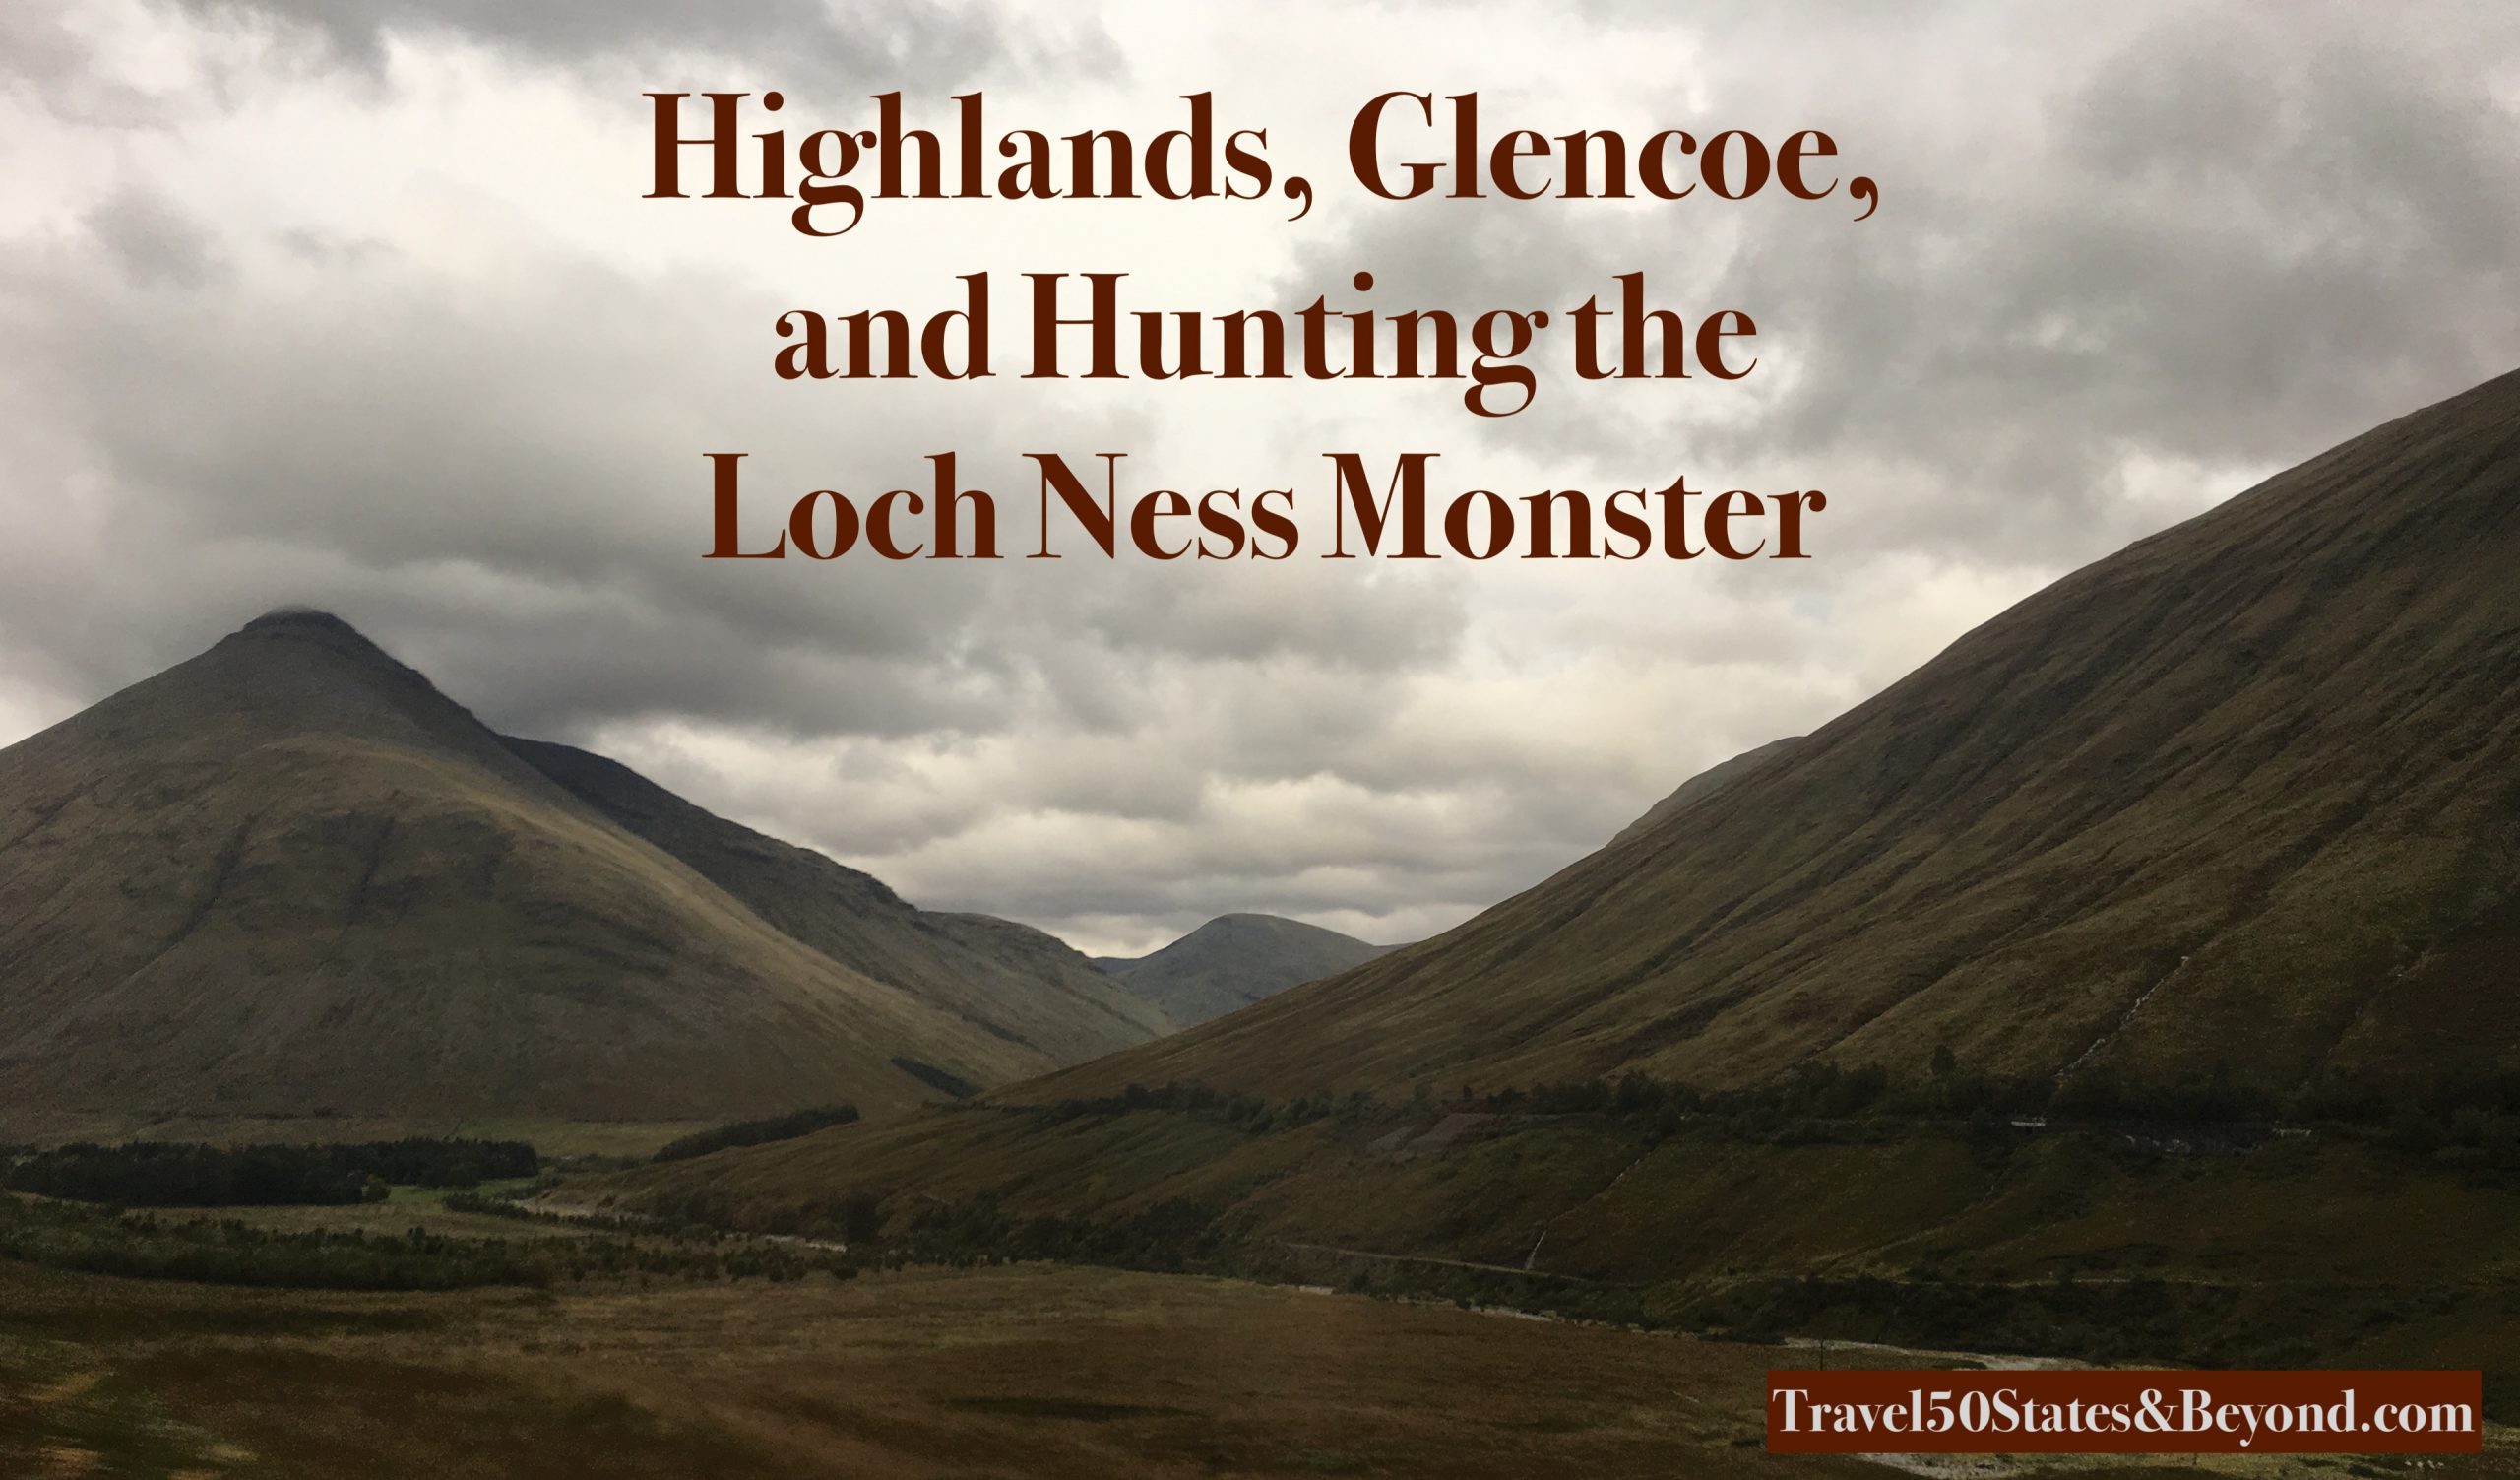 The Highlands, Glencoe, and the Hunt for Nessie